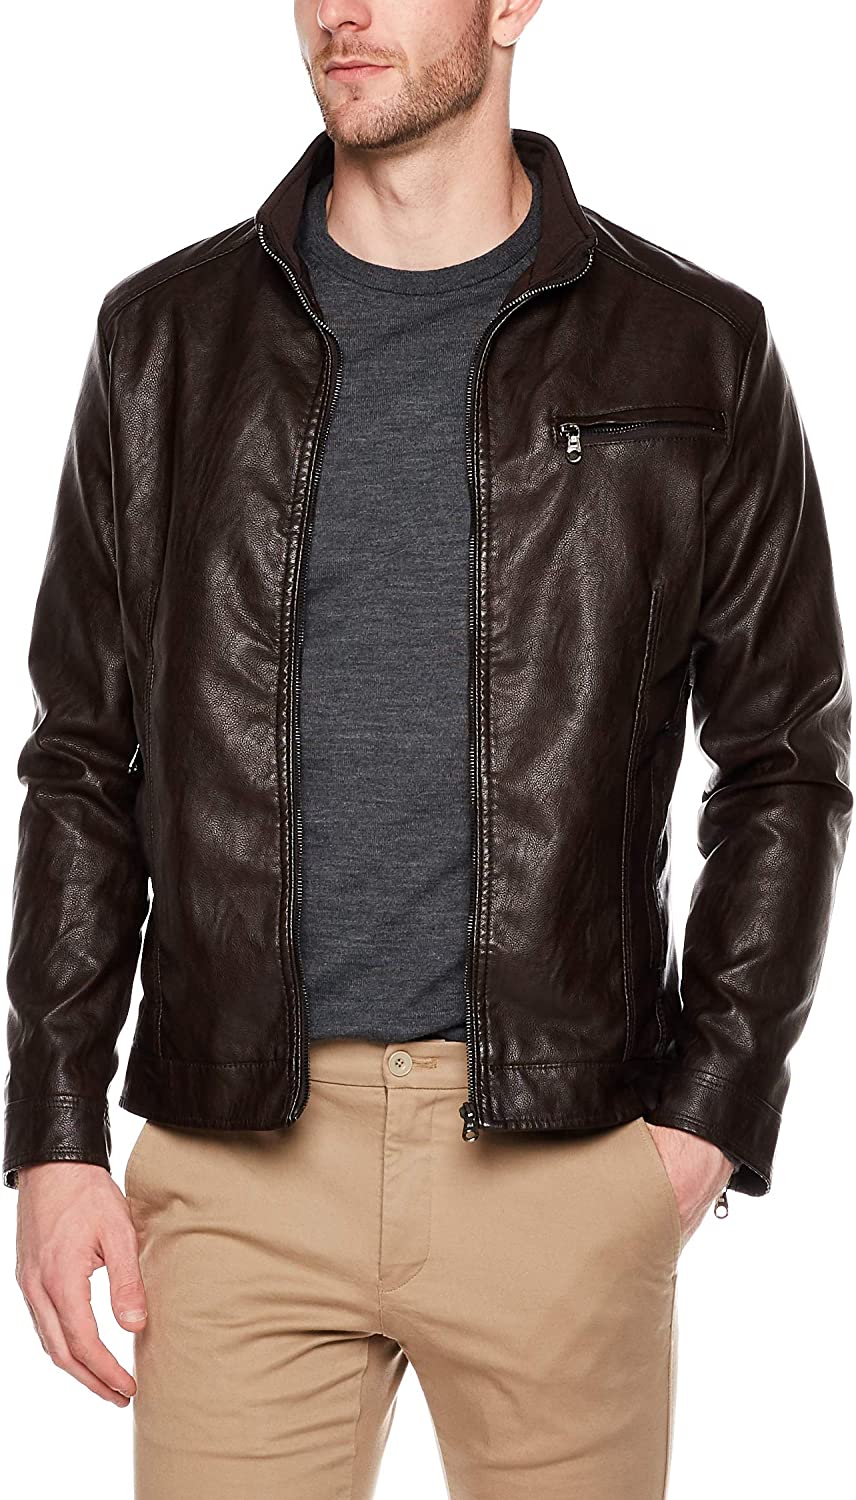 Coffee Color Genuine Sheep Leather Jacket In Slim Fit Classic Style For Men